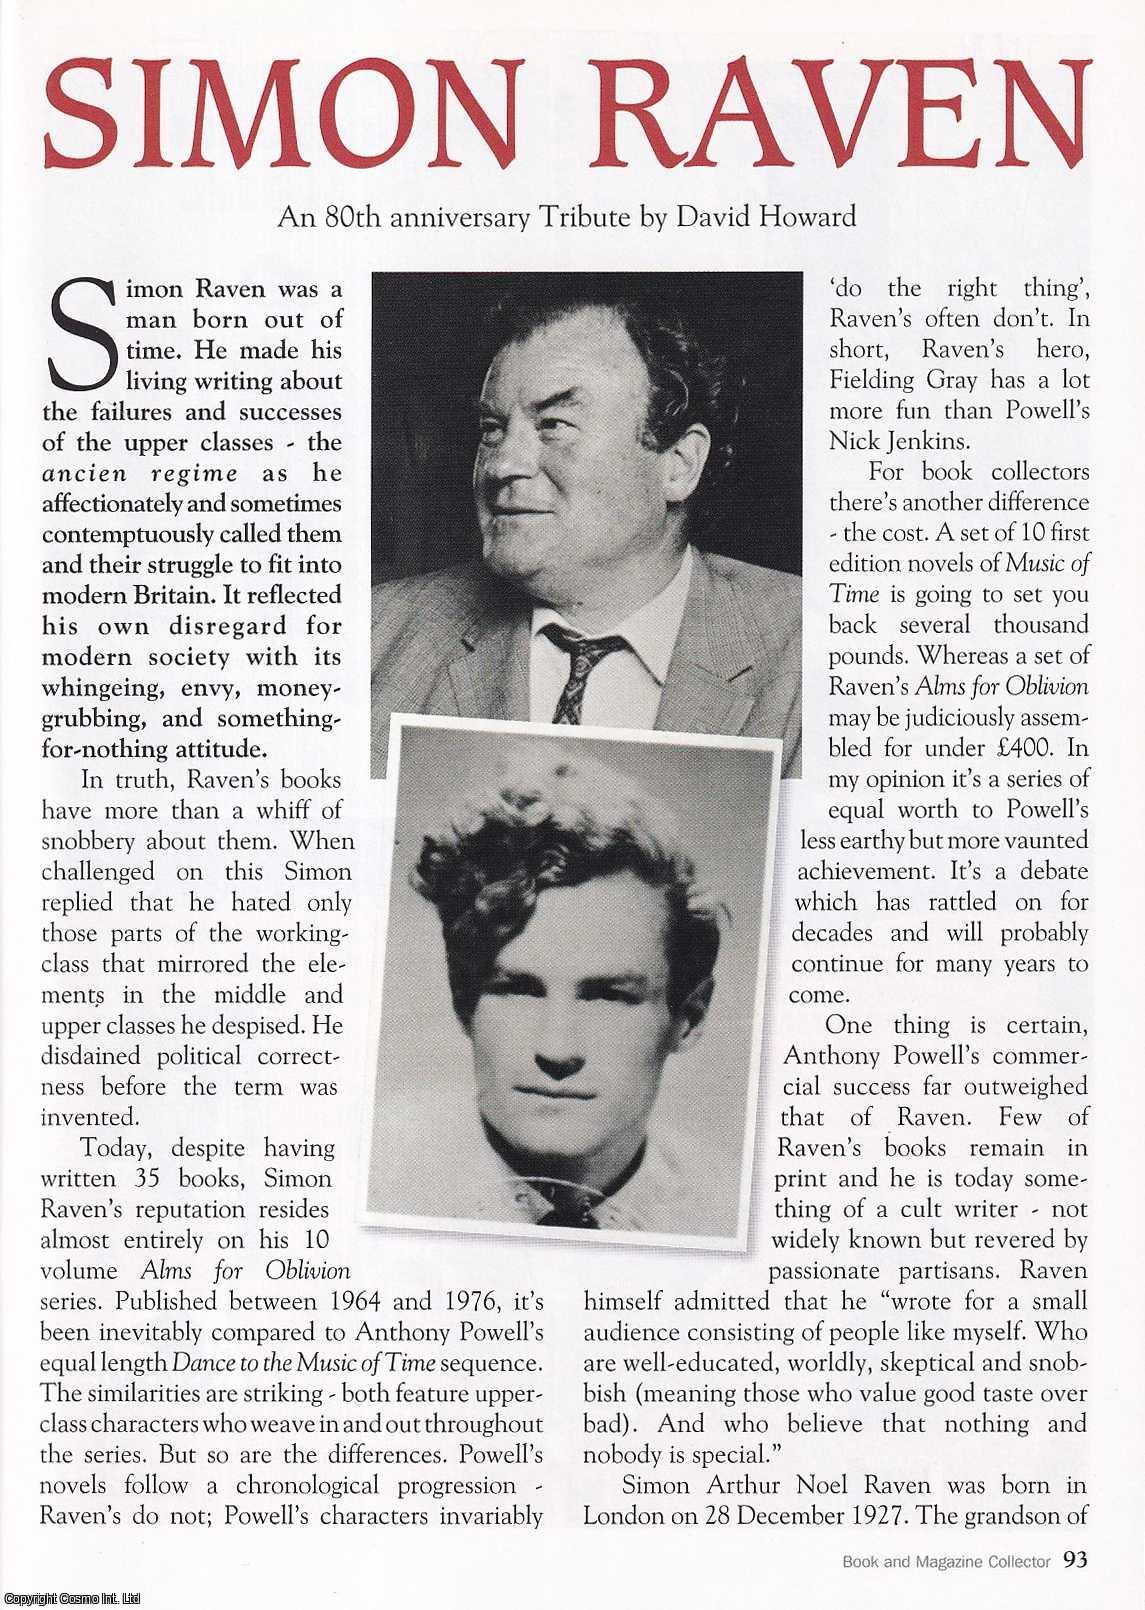 David Howard - Simon Raven. An 80th Anniversary Tribute. This is an original article separated from an issue of The Book & Magazine Collector publication, 2007.